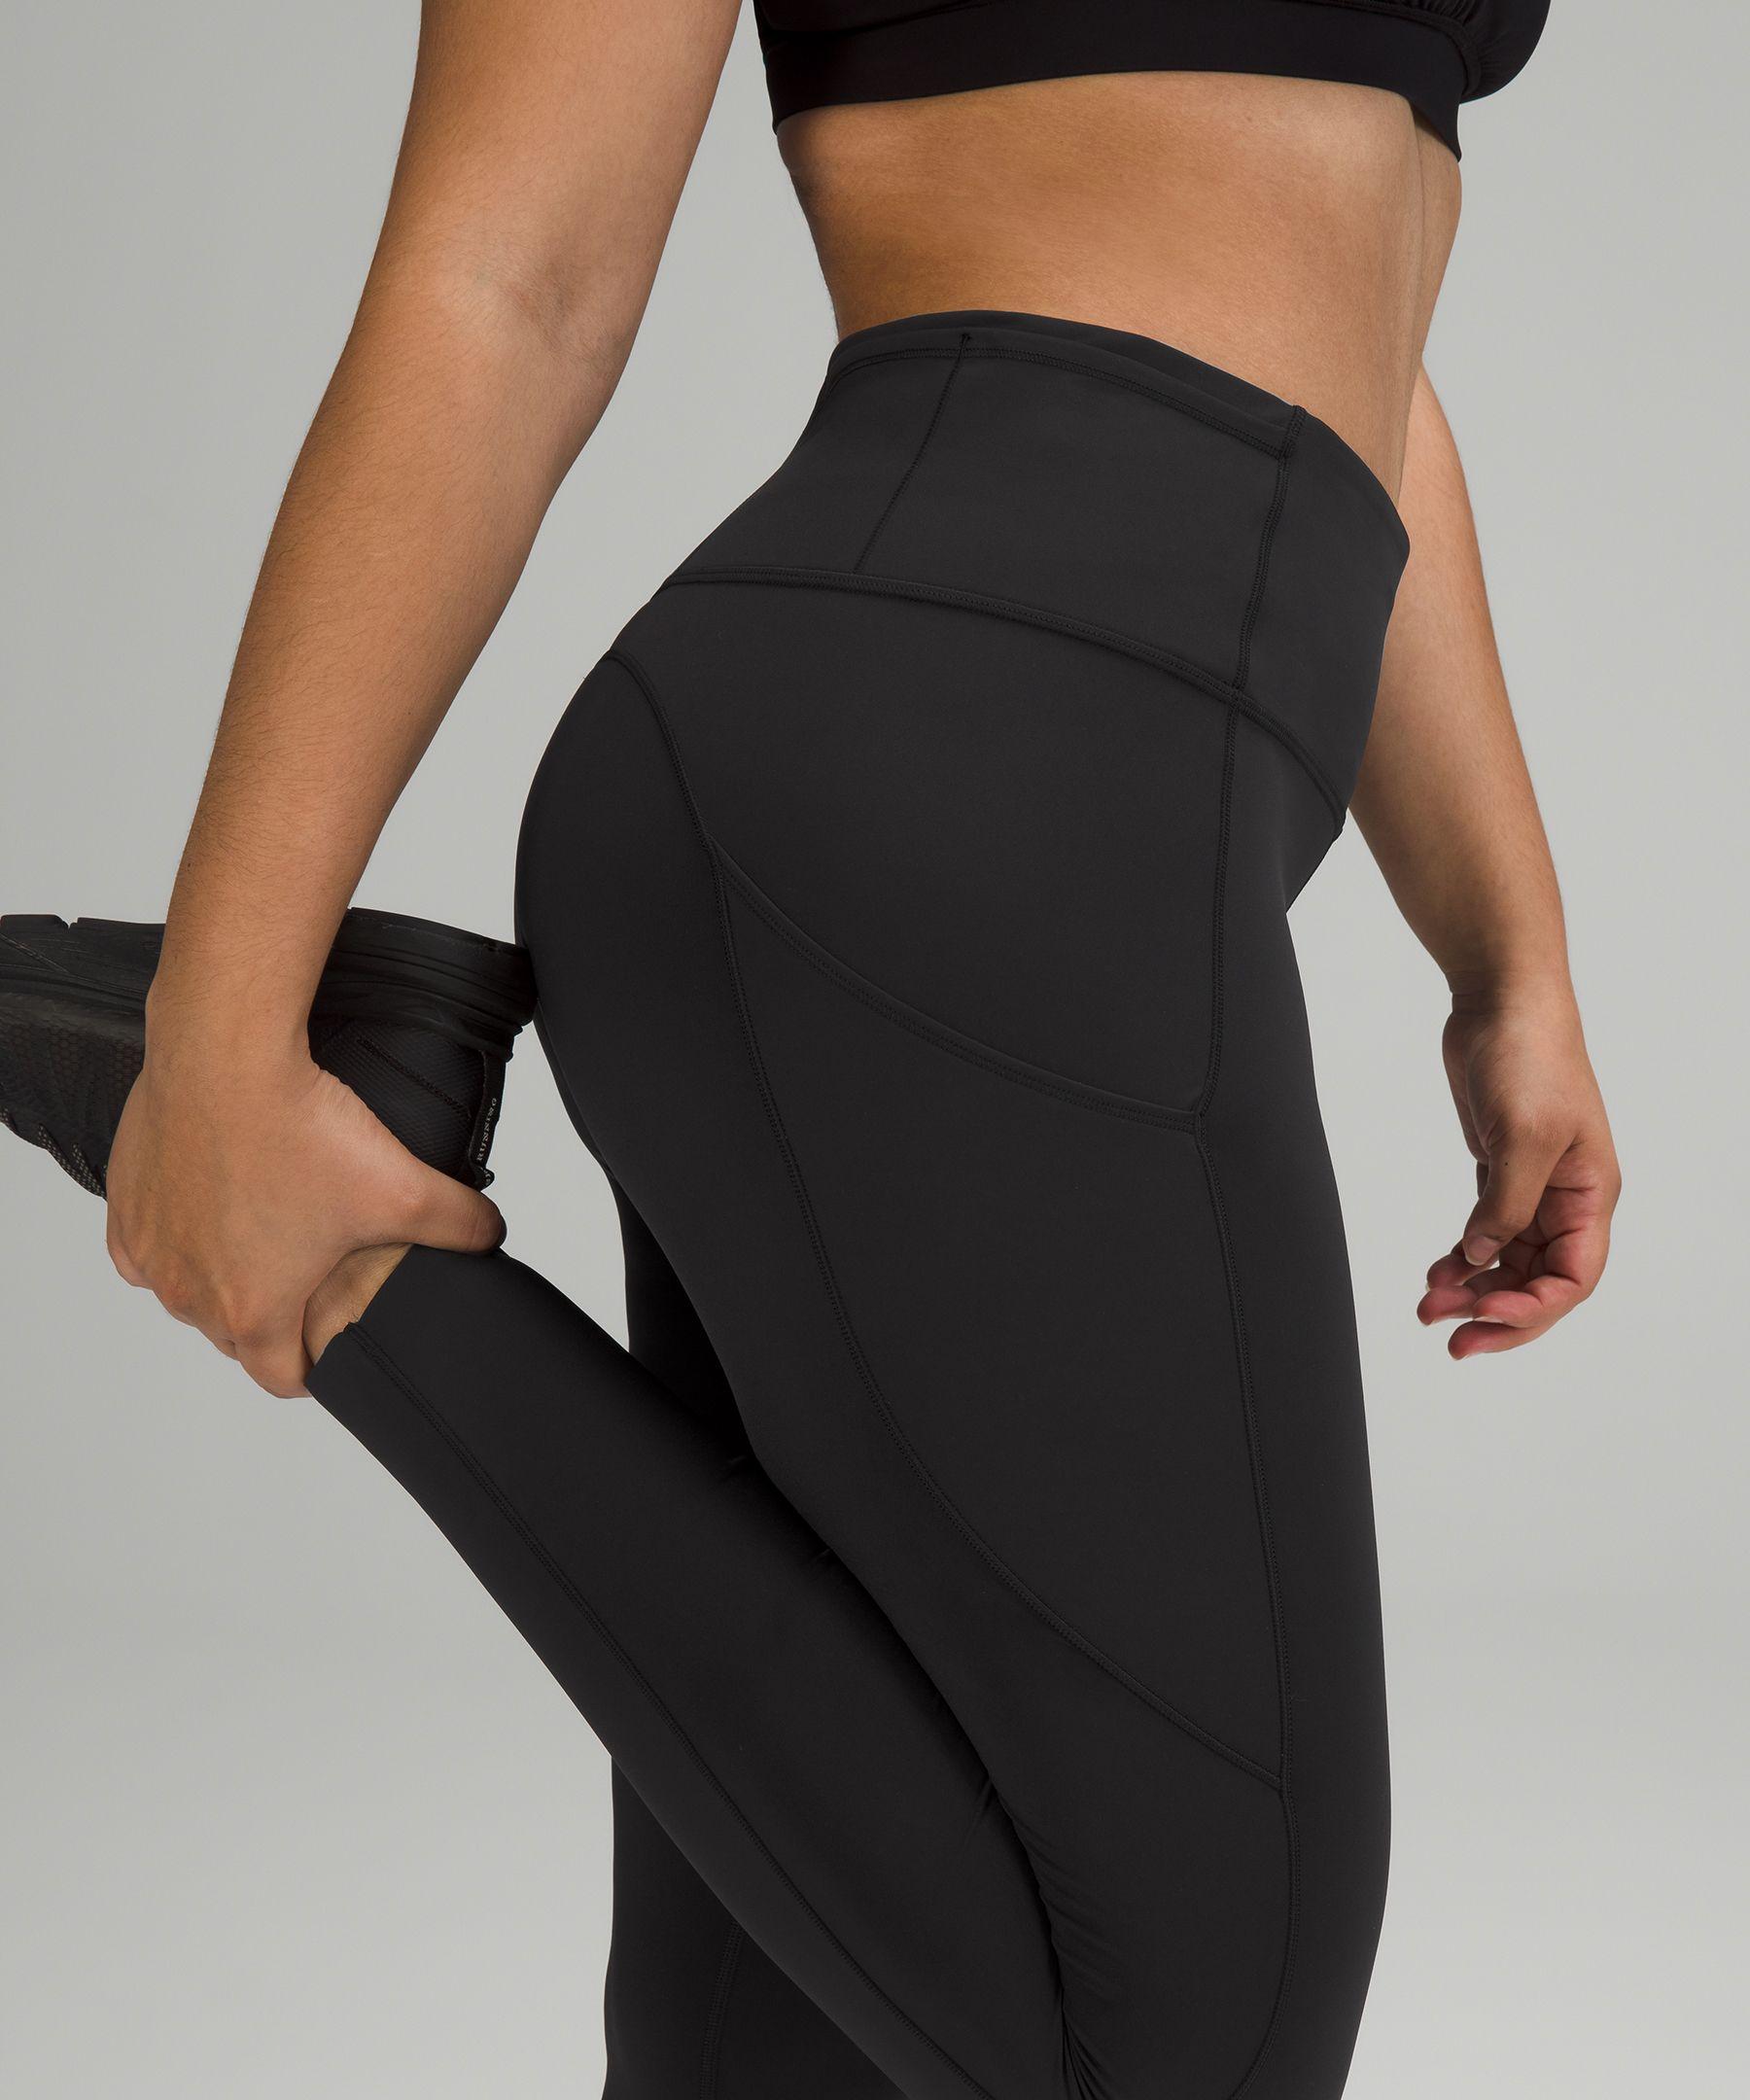 lululemon athletica Fast And Free Brushed Fabric High-rise Tights